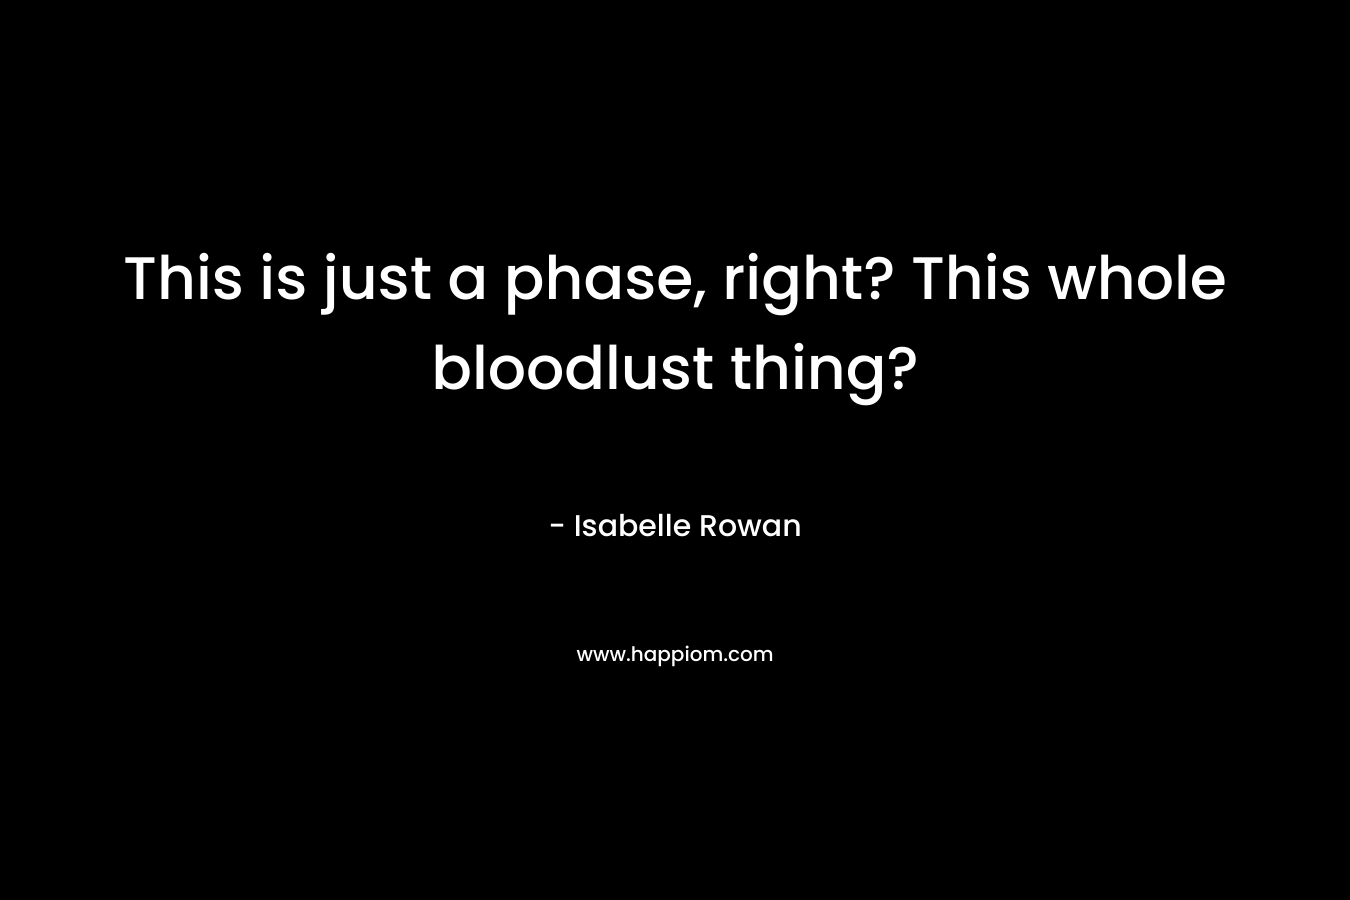 This is just a phase, right? This whole bloodlust thing? – Isabelle Rowan